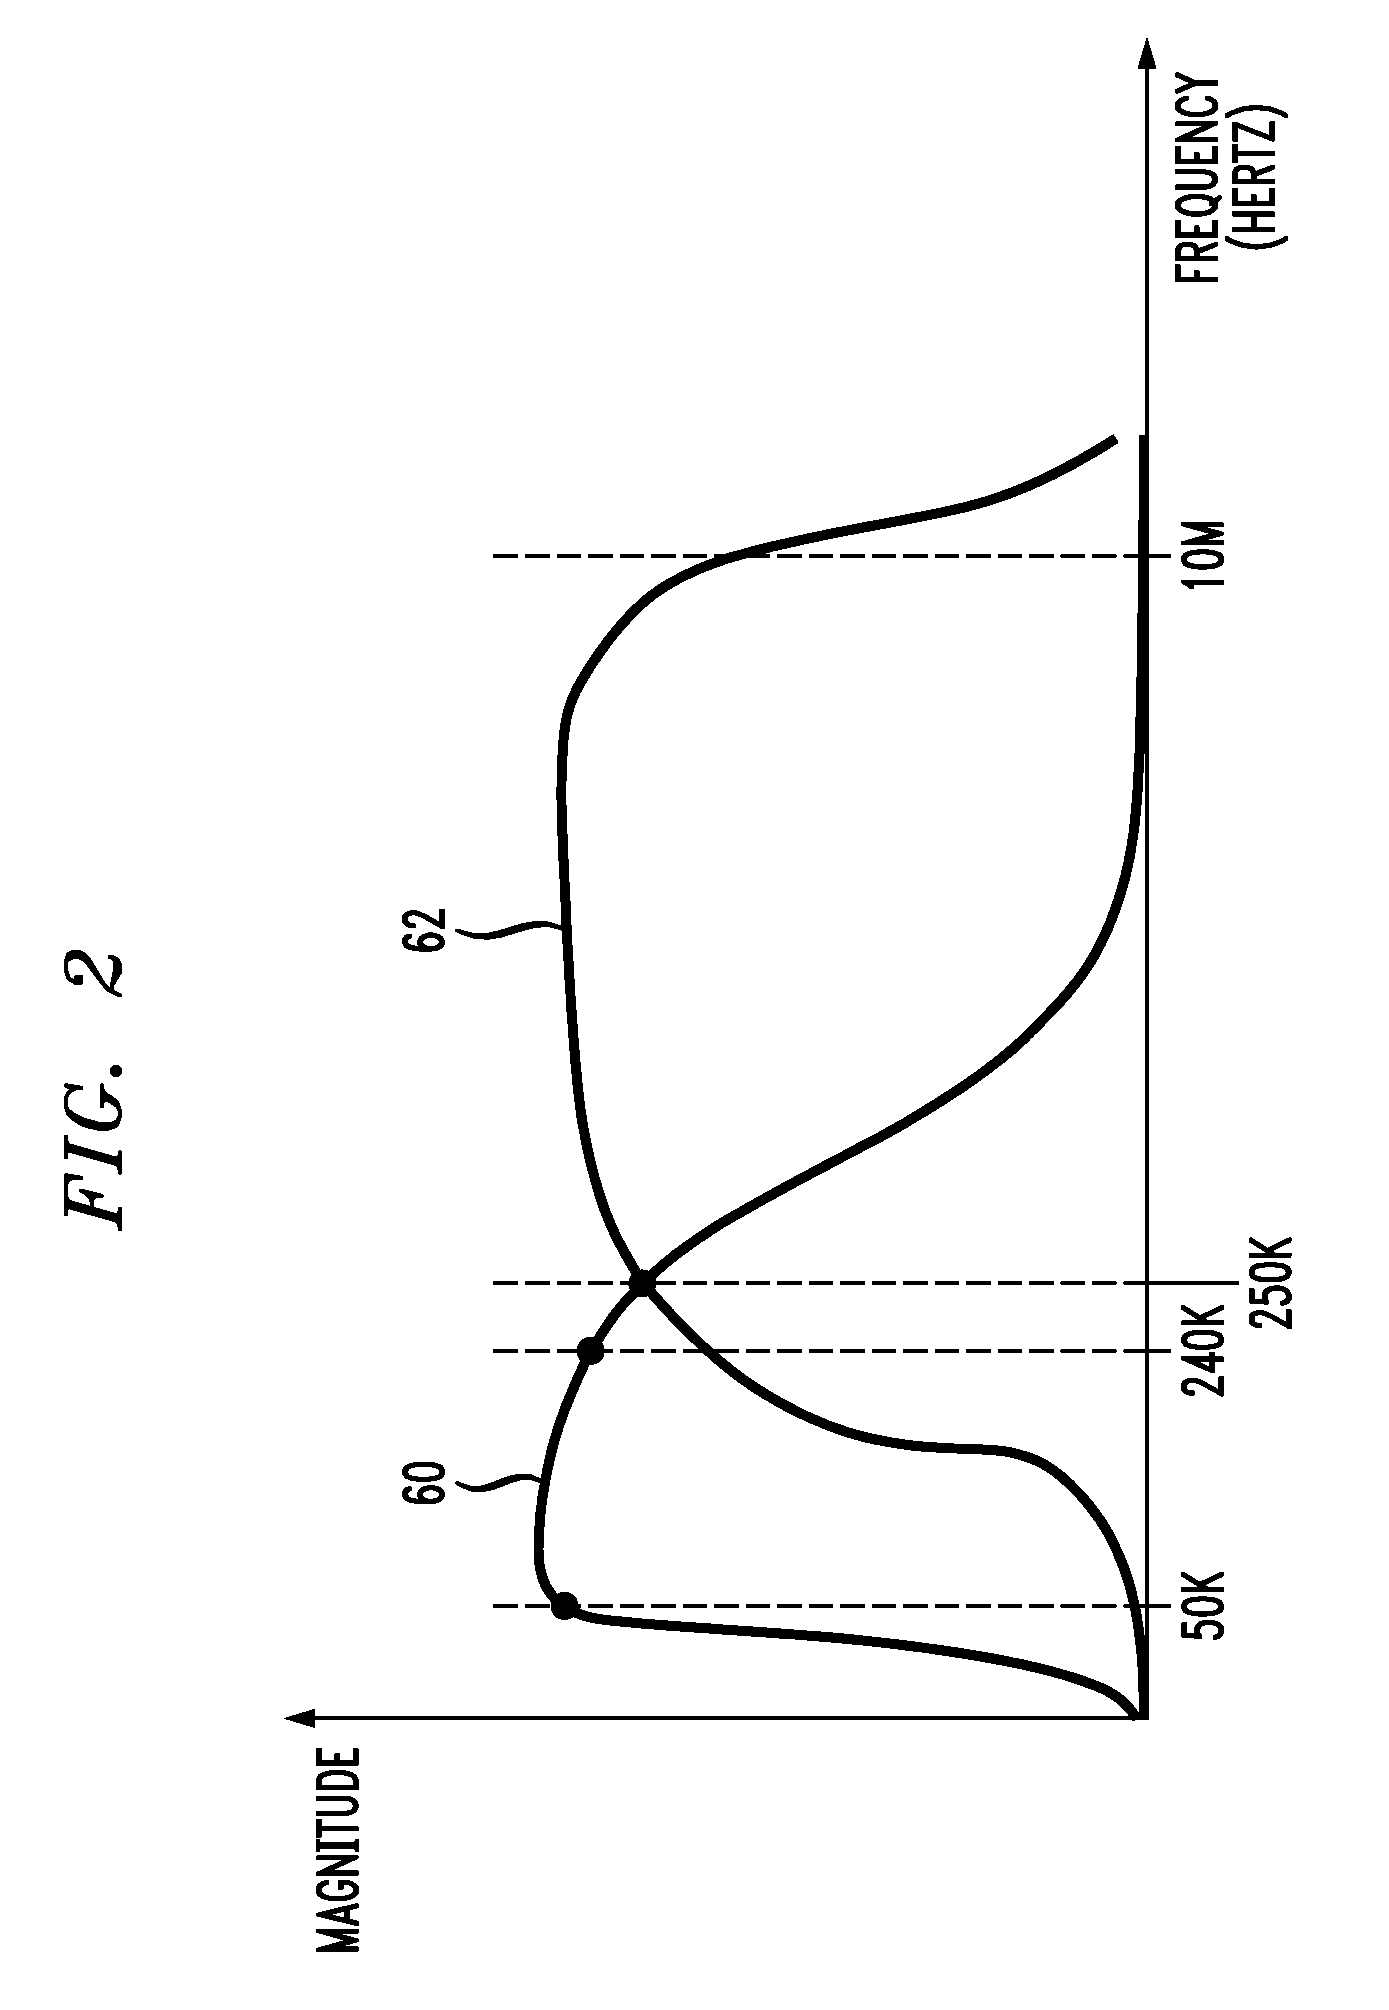 Inductive coupling for communications equipment interface circuitry